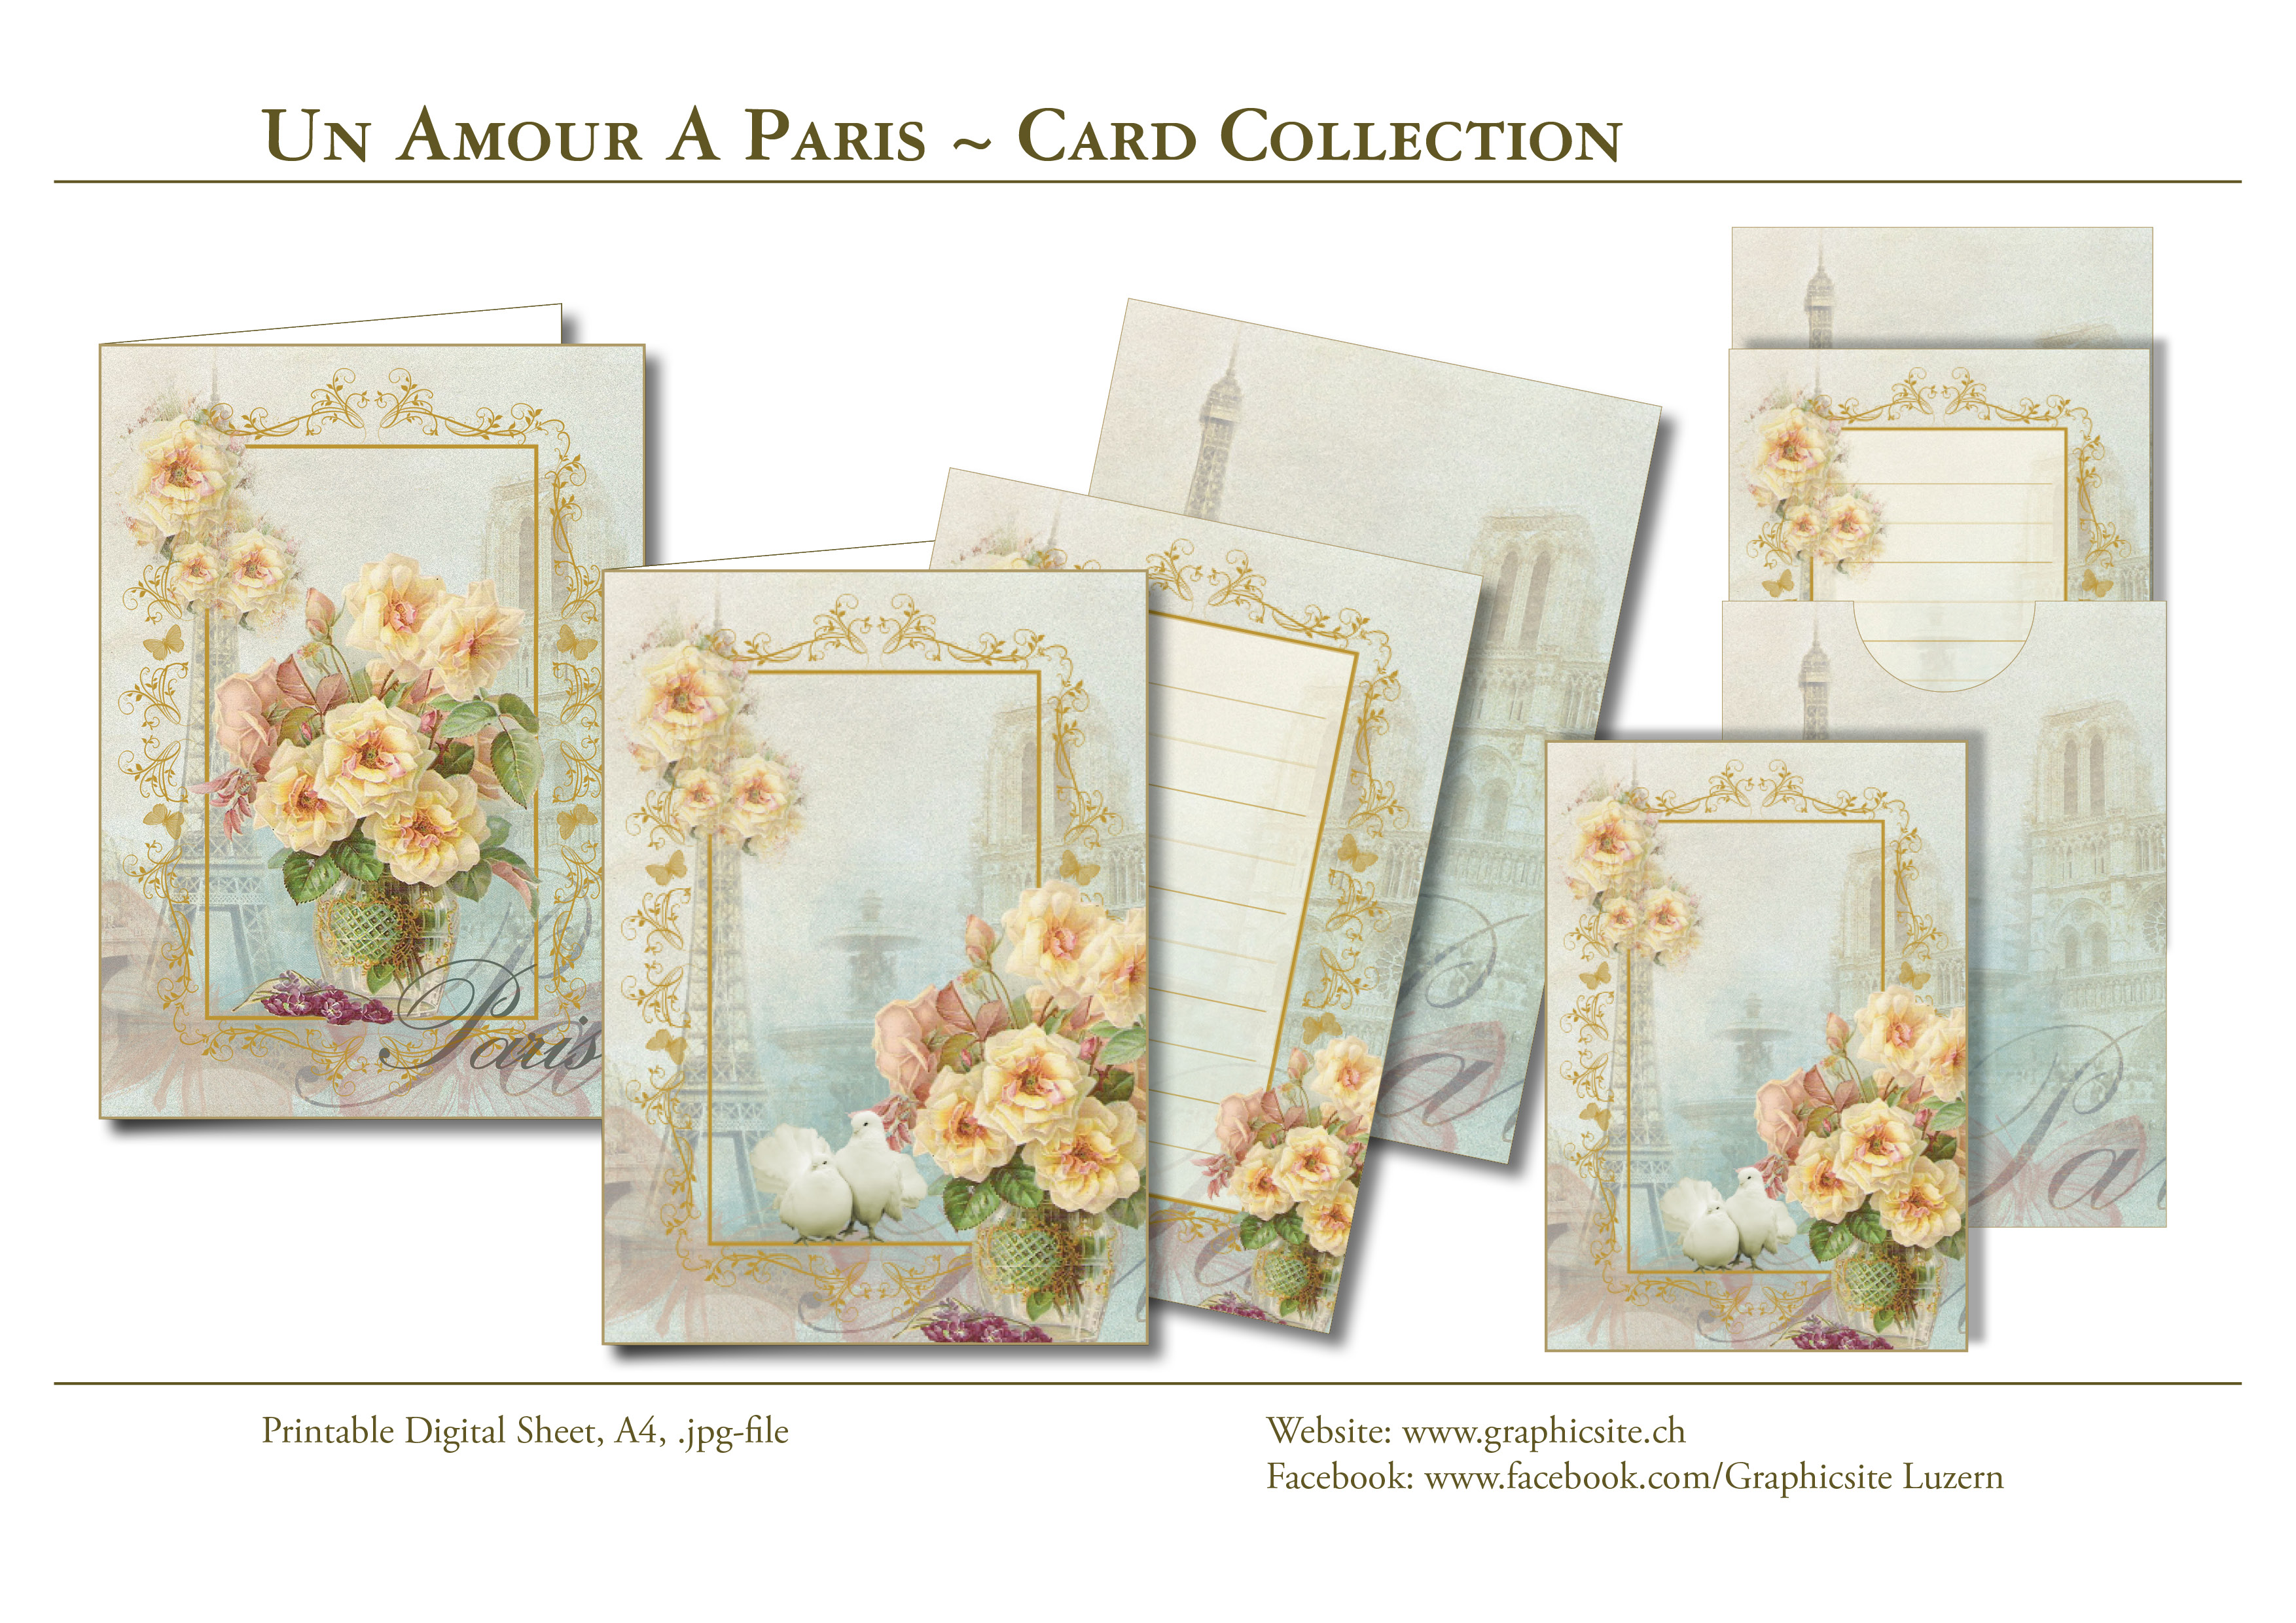 Printable Digital Sheets - Collections - Card Collection - Un Amour A Paris - Greeting Cards, Love Cards, Paris, French, Vintage, romantic, flowers, Floral, Graphicdesign, Luzern, Schweiz